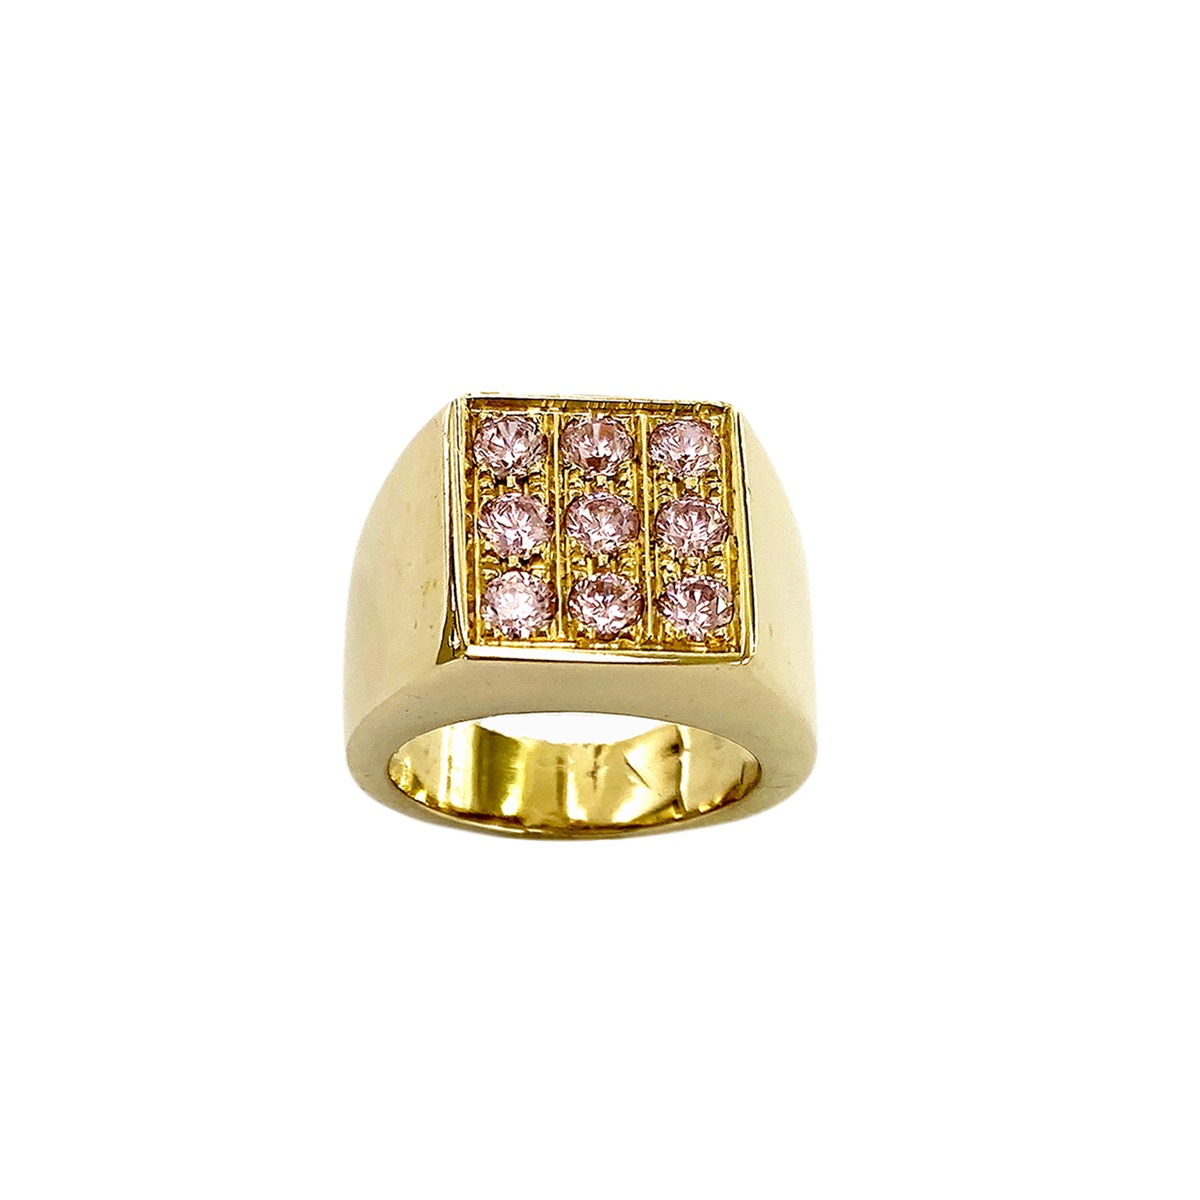 Square ring in bronze with paved pink zircons